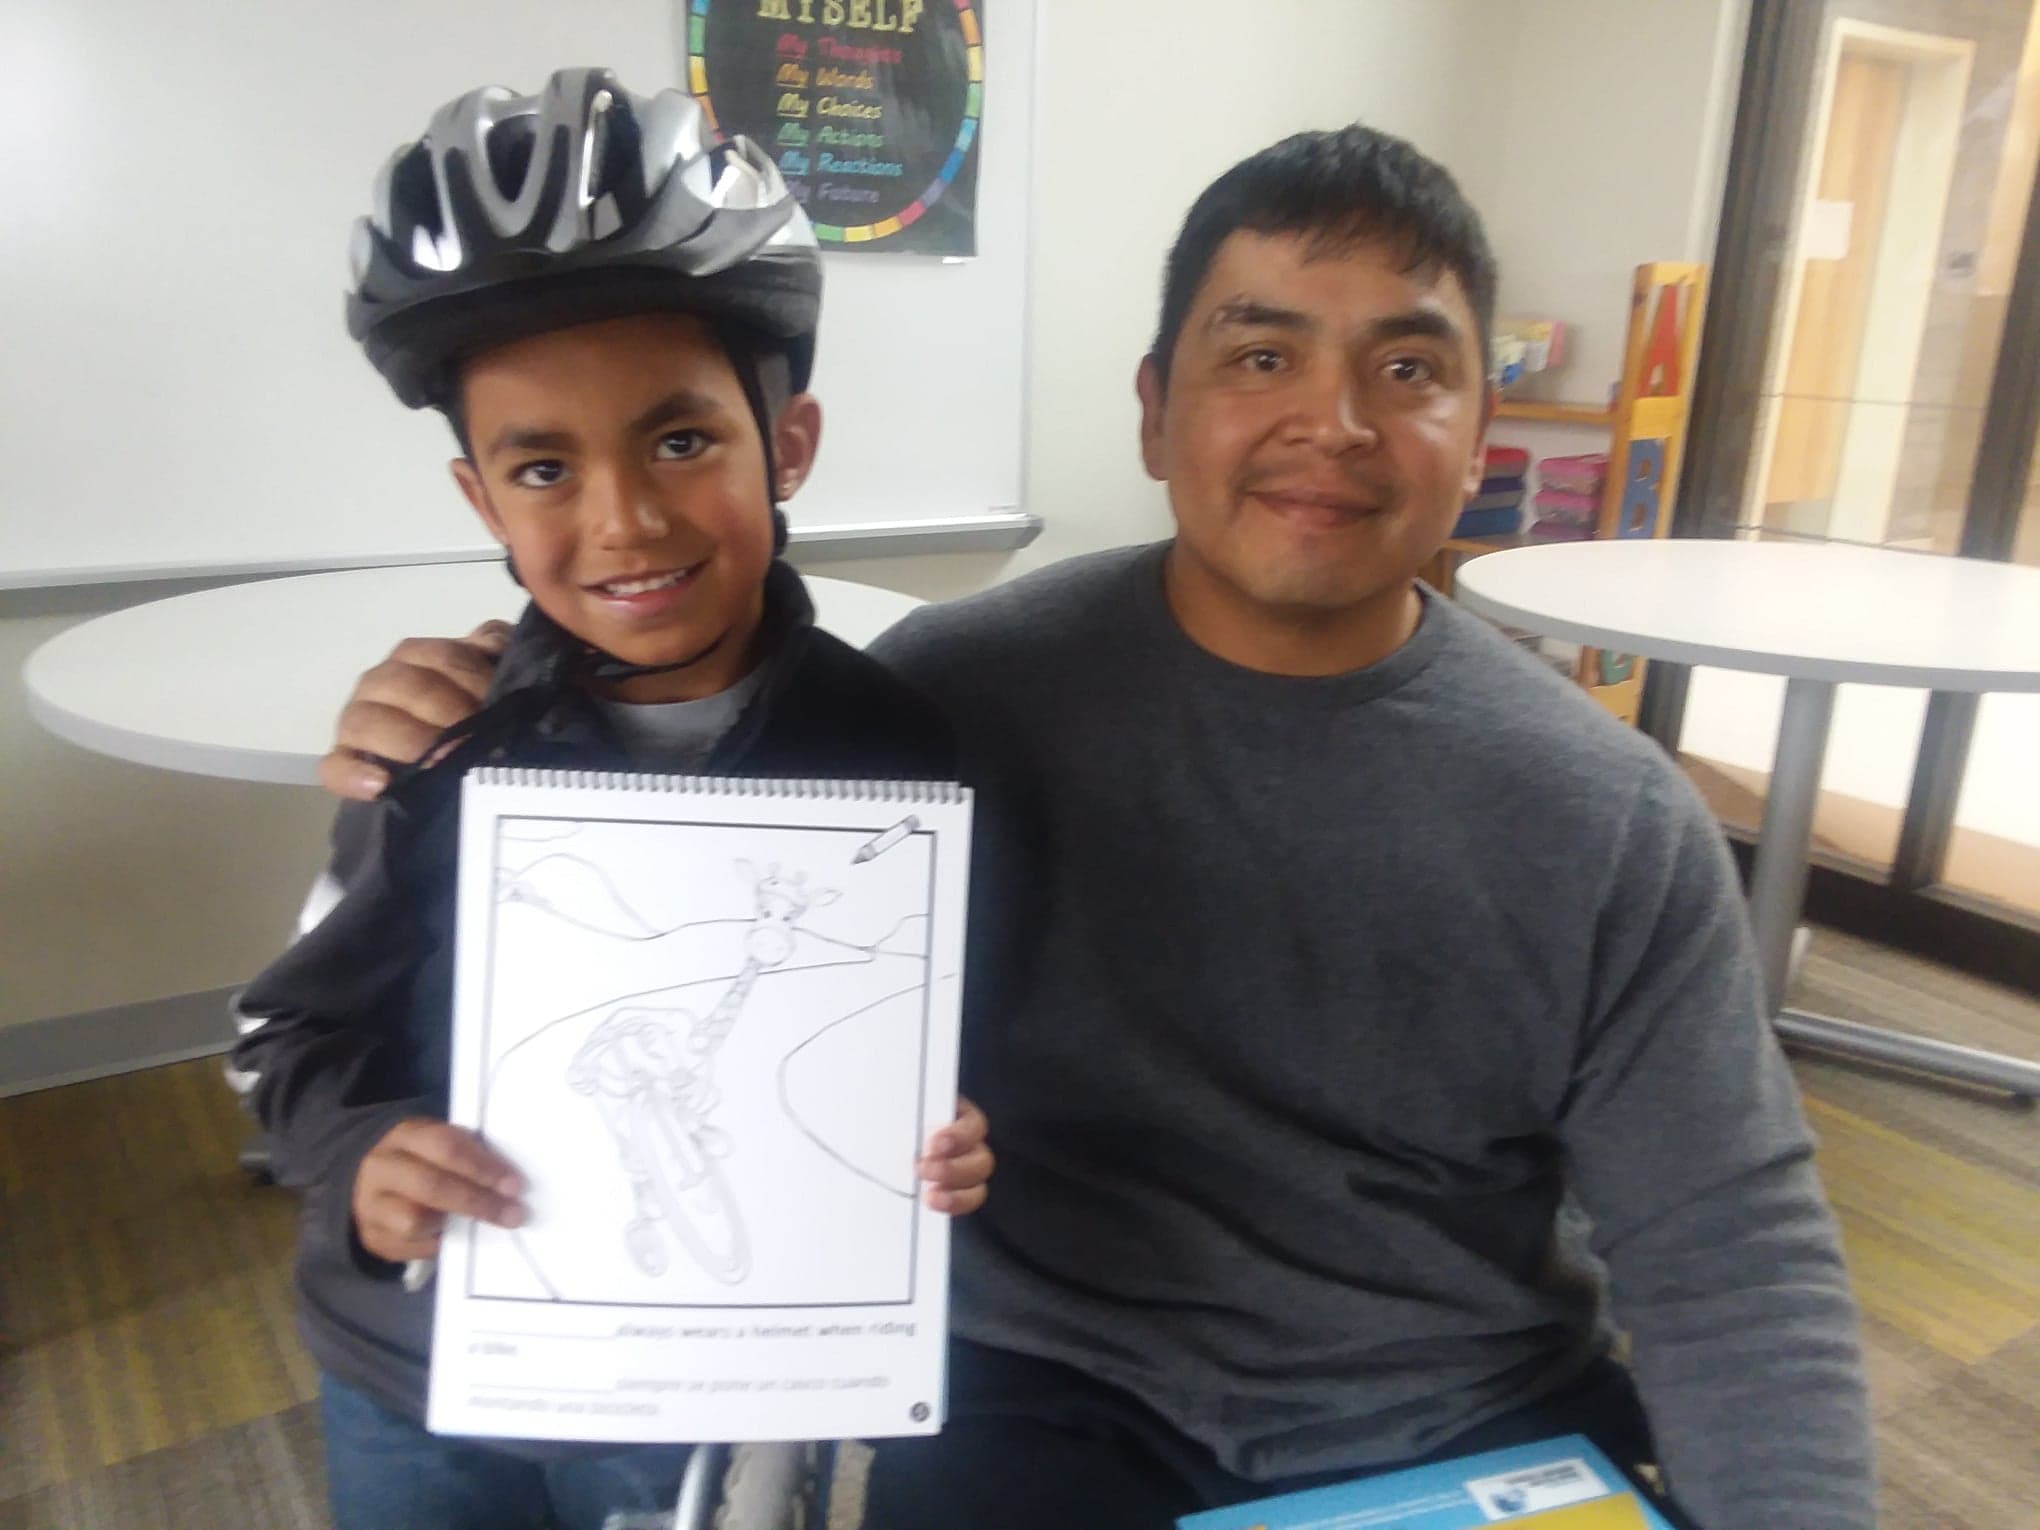 A happy Navajo student with his new helmet and bicycle safety book donated by the NM Brain Injury Awareness Council accompanied by Josh Longhat, ThinkFirst Navajo VIP.